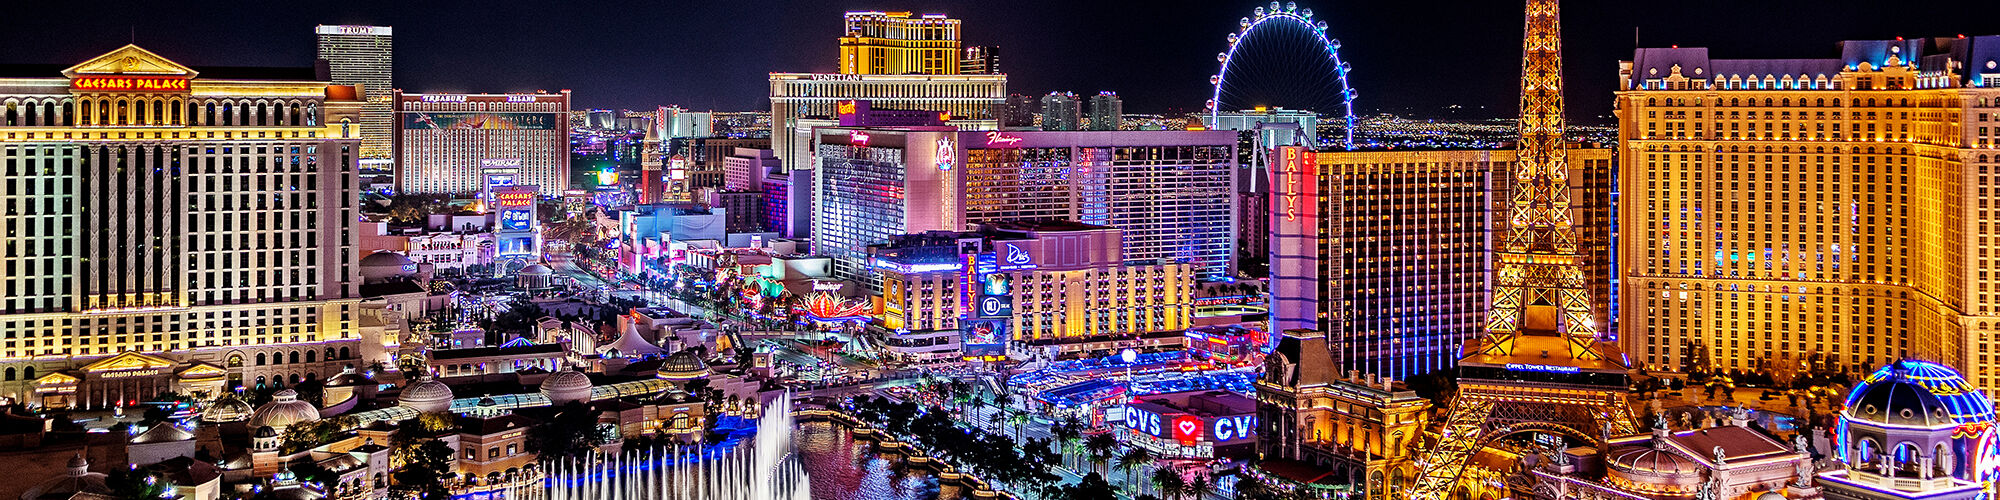 This image showcases the vibrant nightlife of the Las Vegas Strip, featuring illuminated hotels, a Ferris wheel, and a large fountain display.